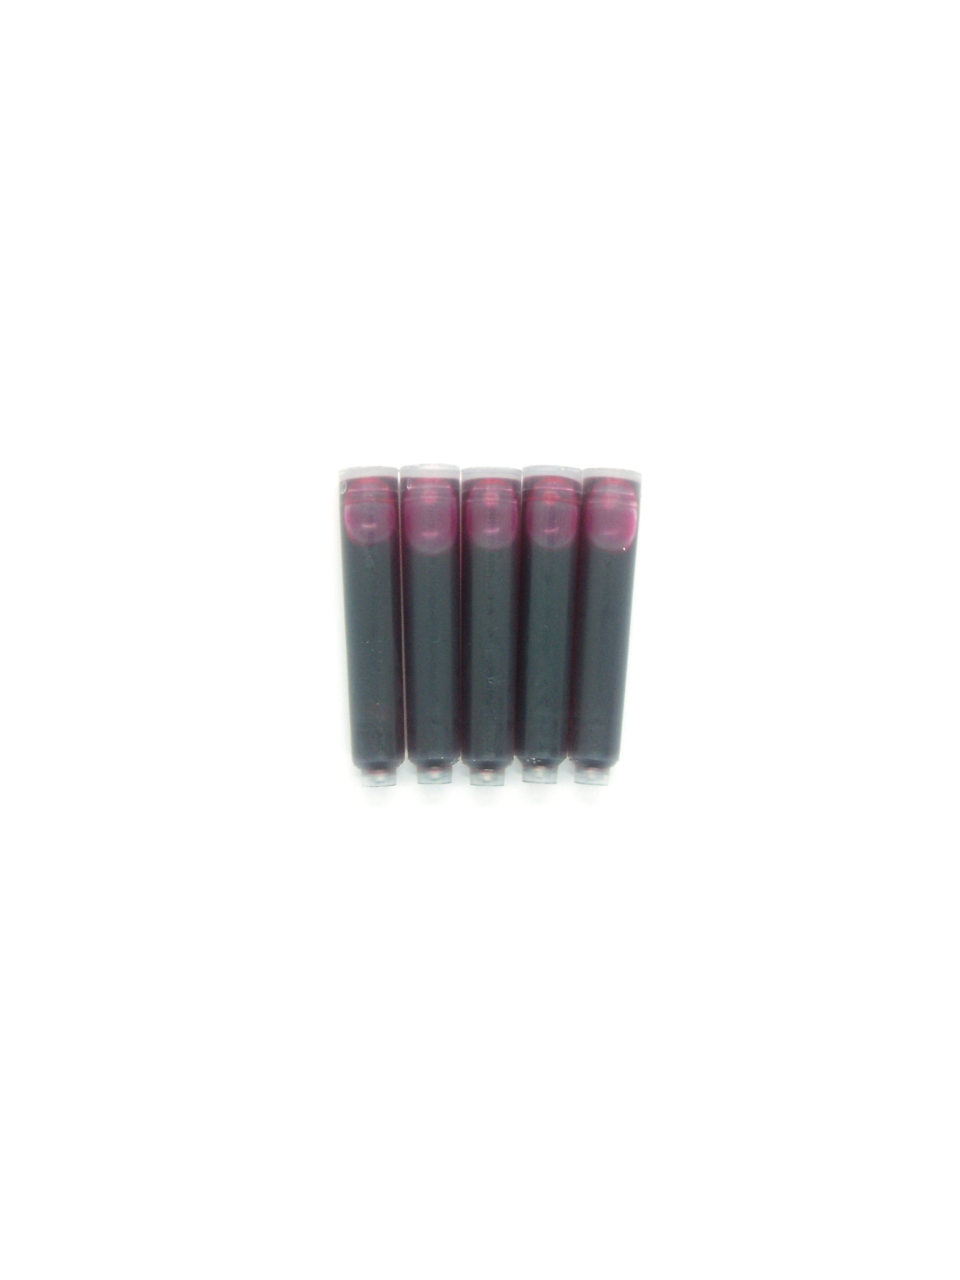 PenConverter Ink Cartridges For A&W Fountain Pens (Pink)